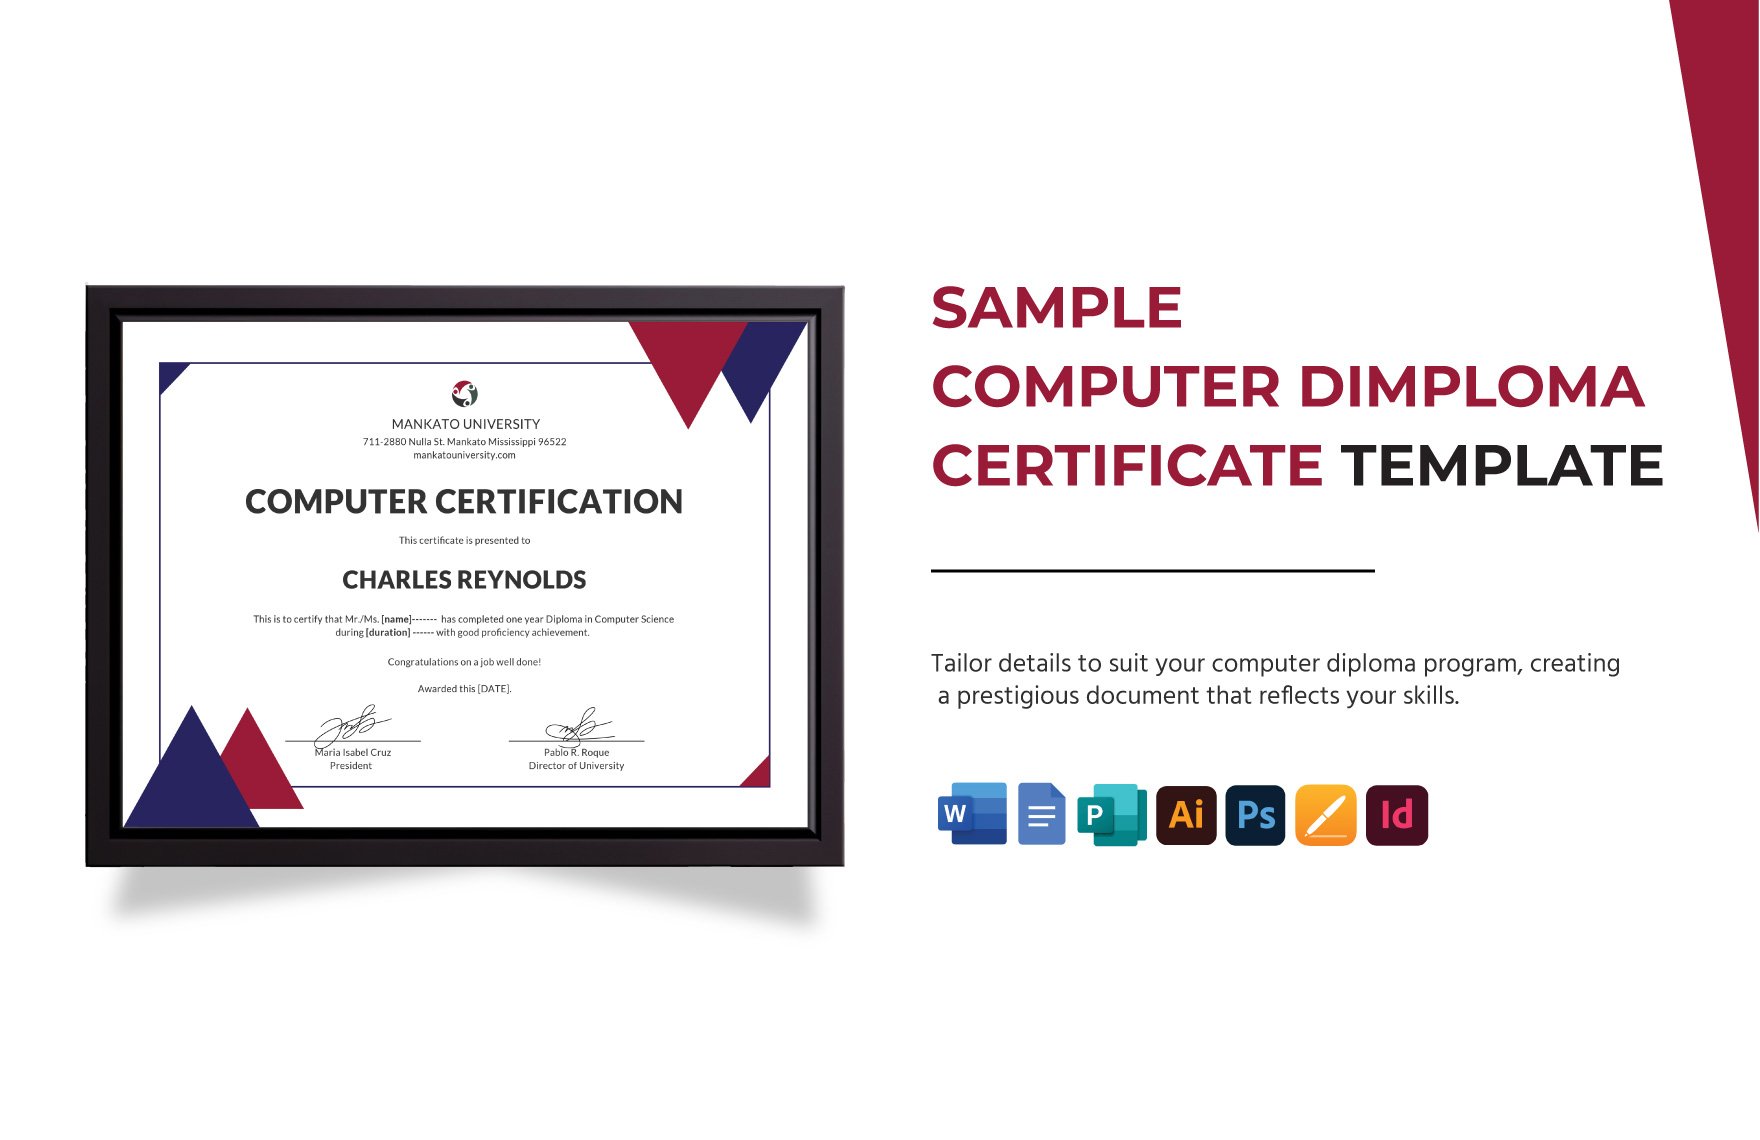 Sample Computer Diploma Certificate Template in Word, Google Docs, Illustrator, PSD, Apple Pages, Publisher, InDesign